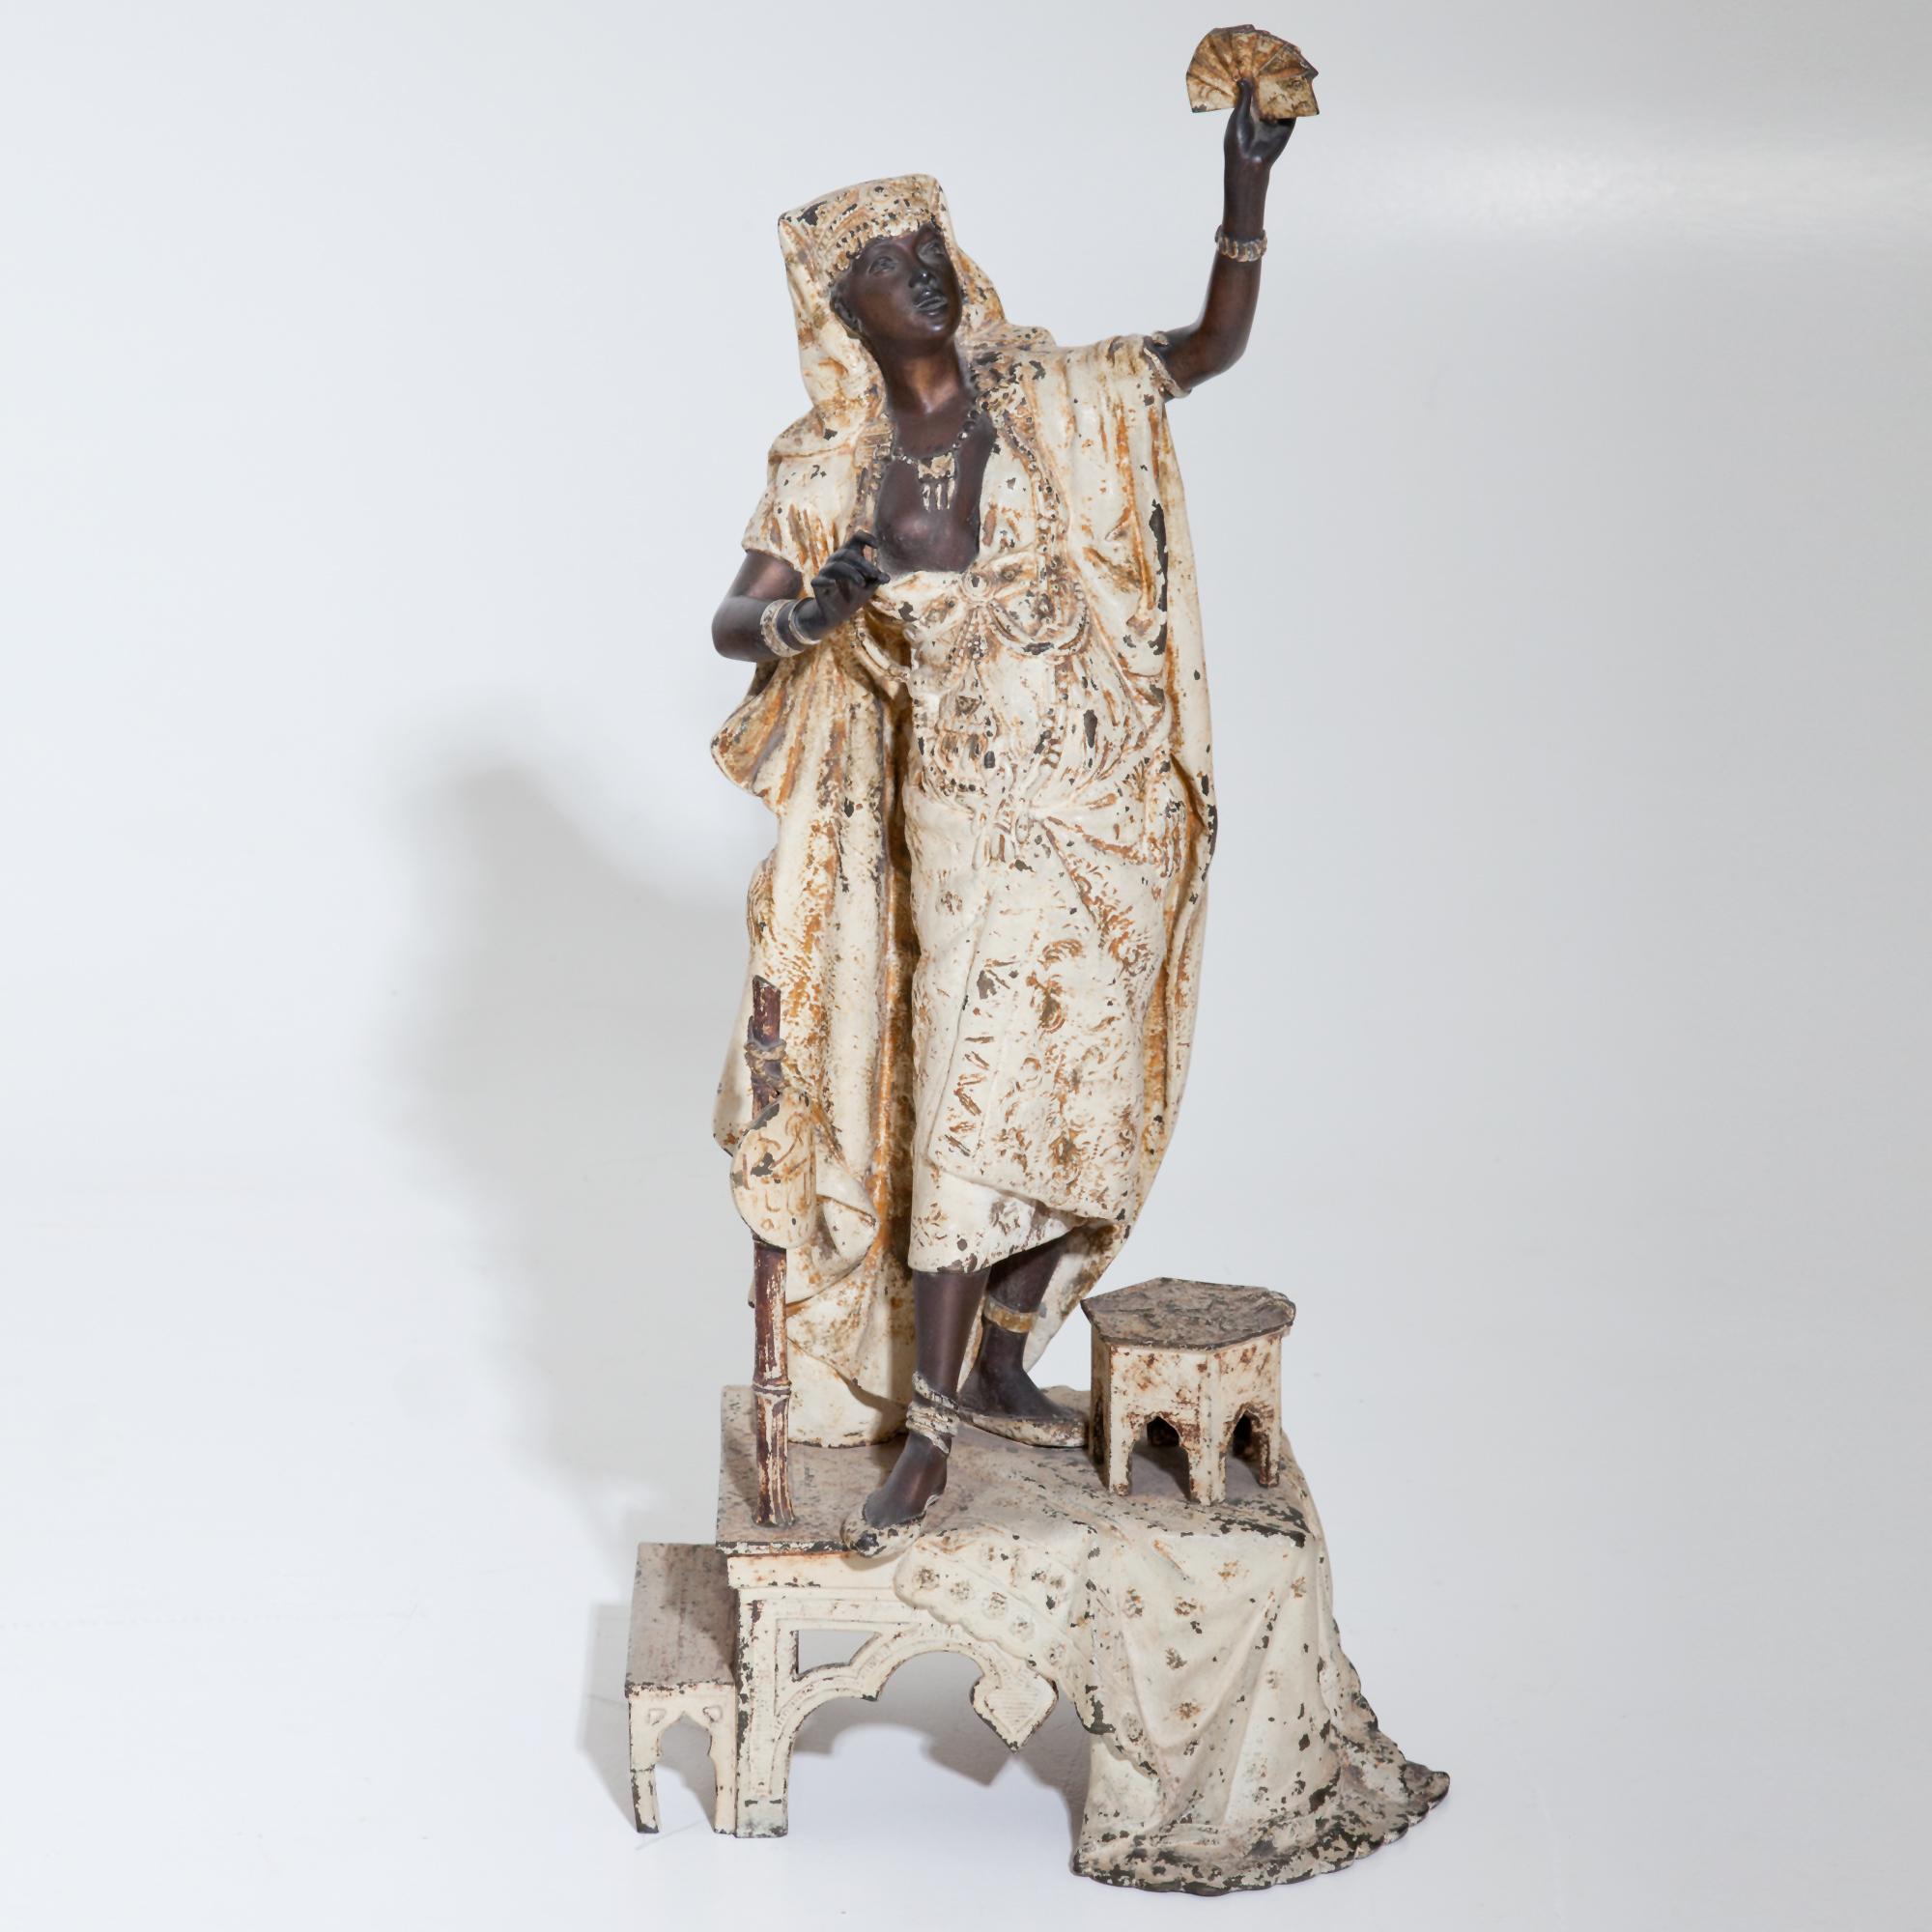 Group of two Moors, carrying large cauldrons and a female fortune teller in white robes standing on a small pedestal. Zinc cast iron, partly white painted. (Fortune teller 68 x 33 x 22, moors 44 x 23 x 18 / Ø23.)